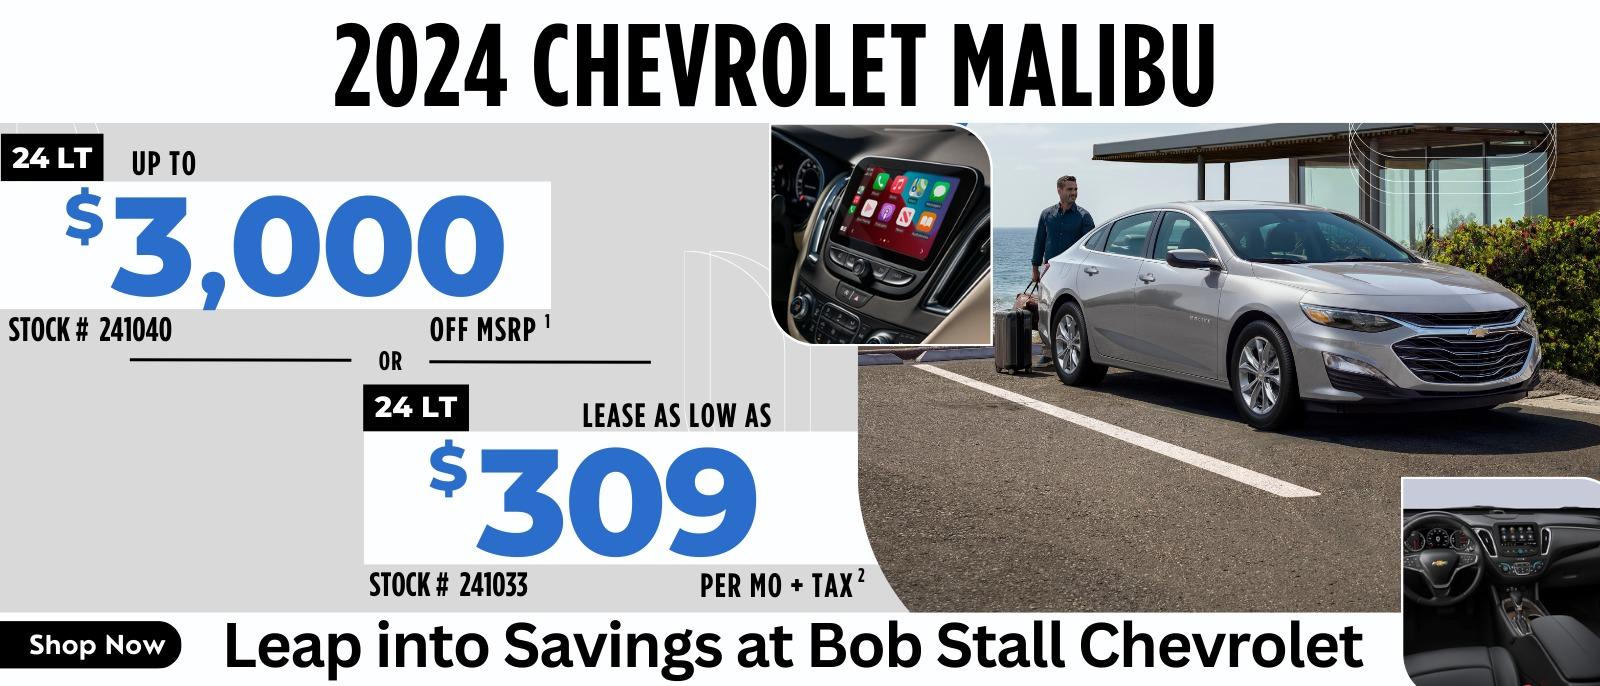 Malibu 2024  Savings - Up to $3,000 off MSRP or Lease as low as $309 per month for 24 Months